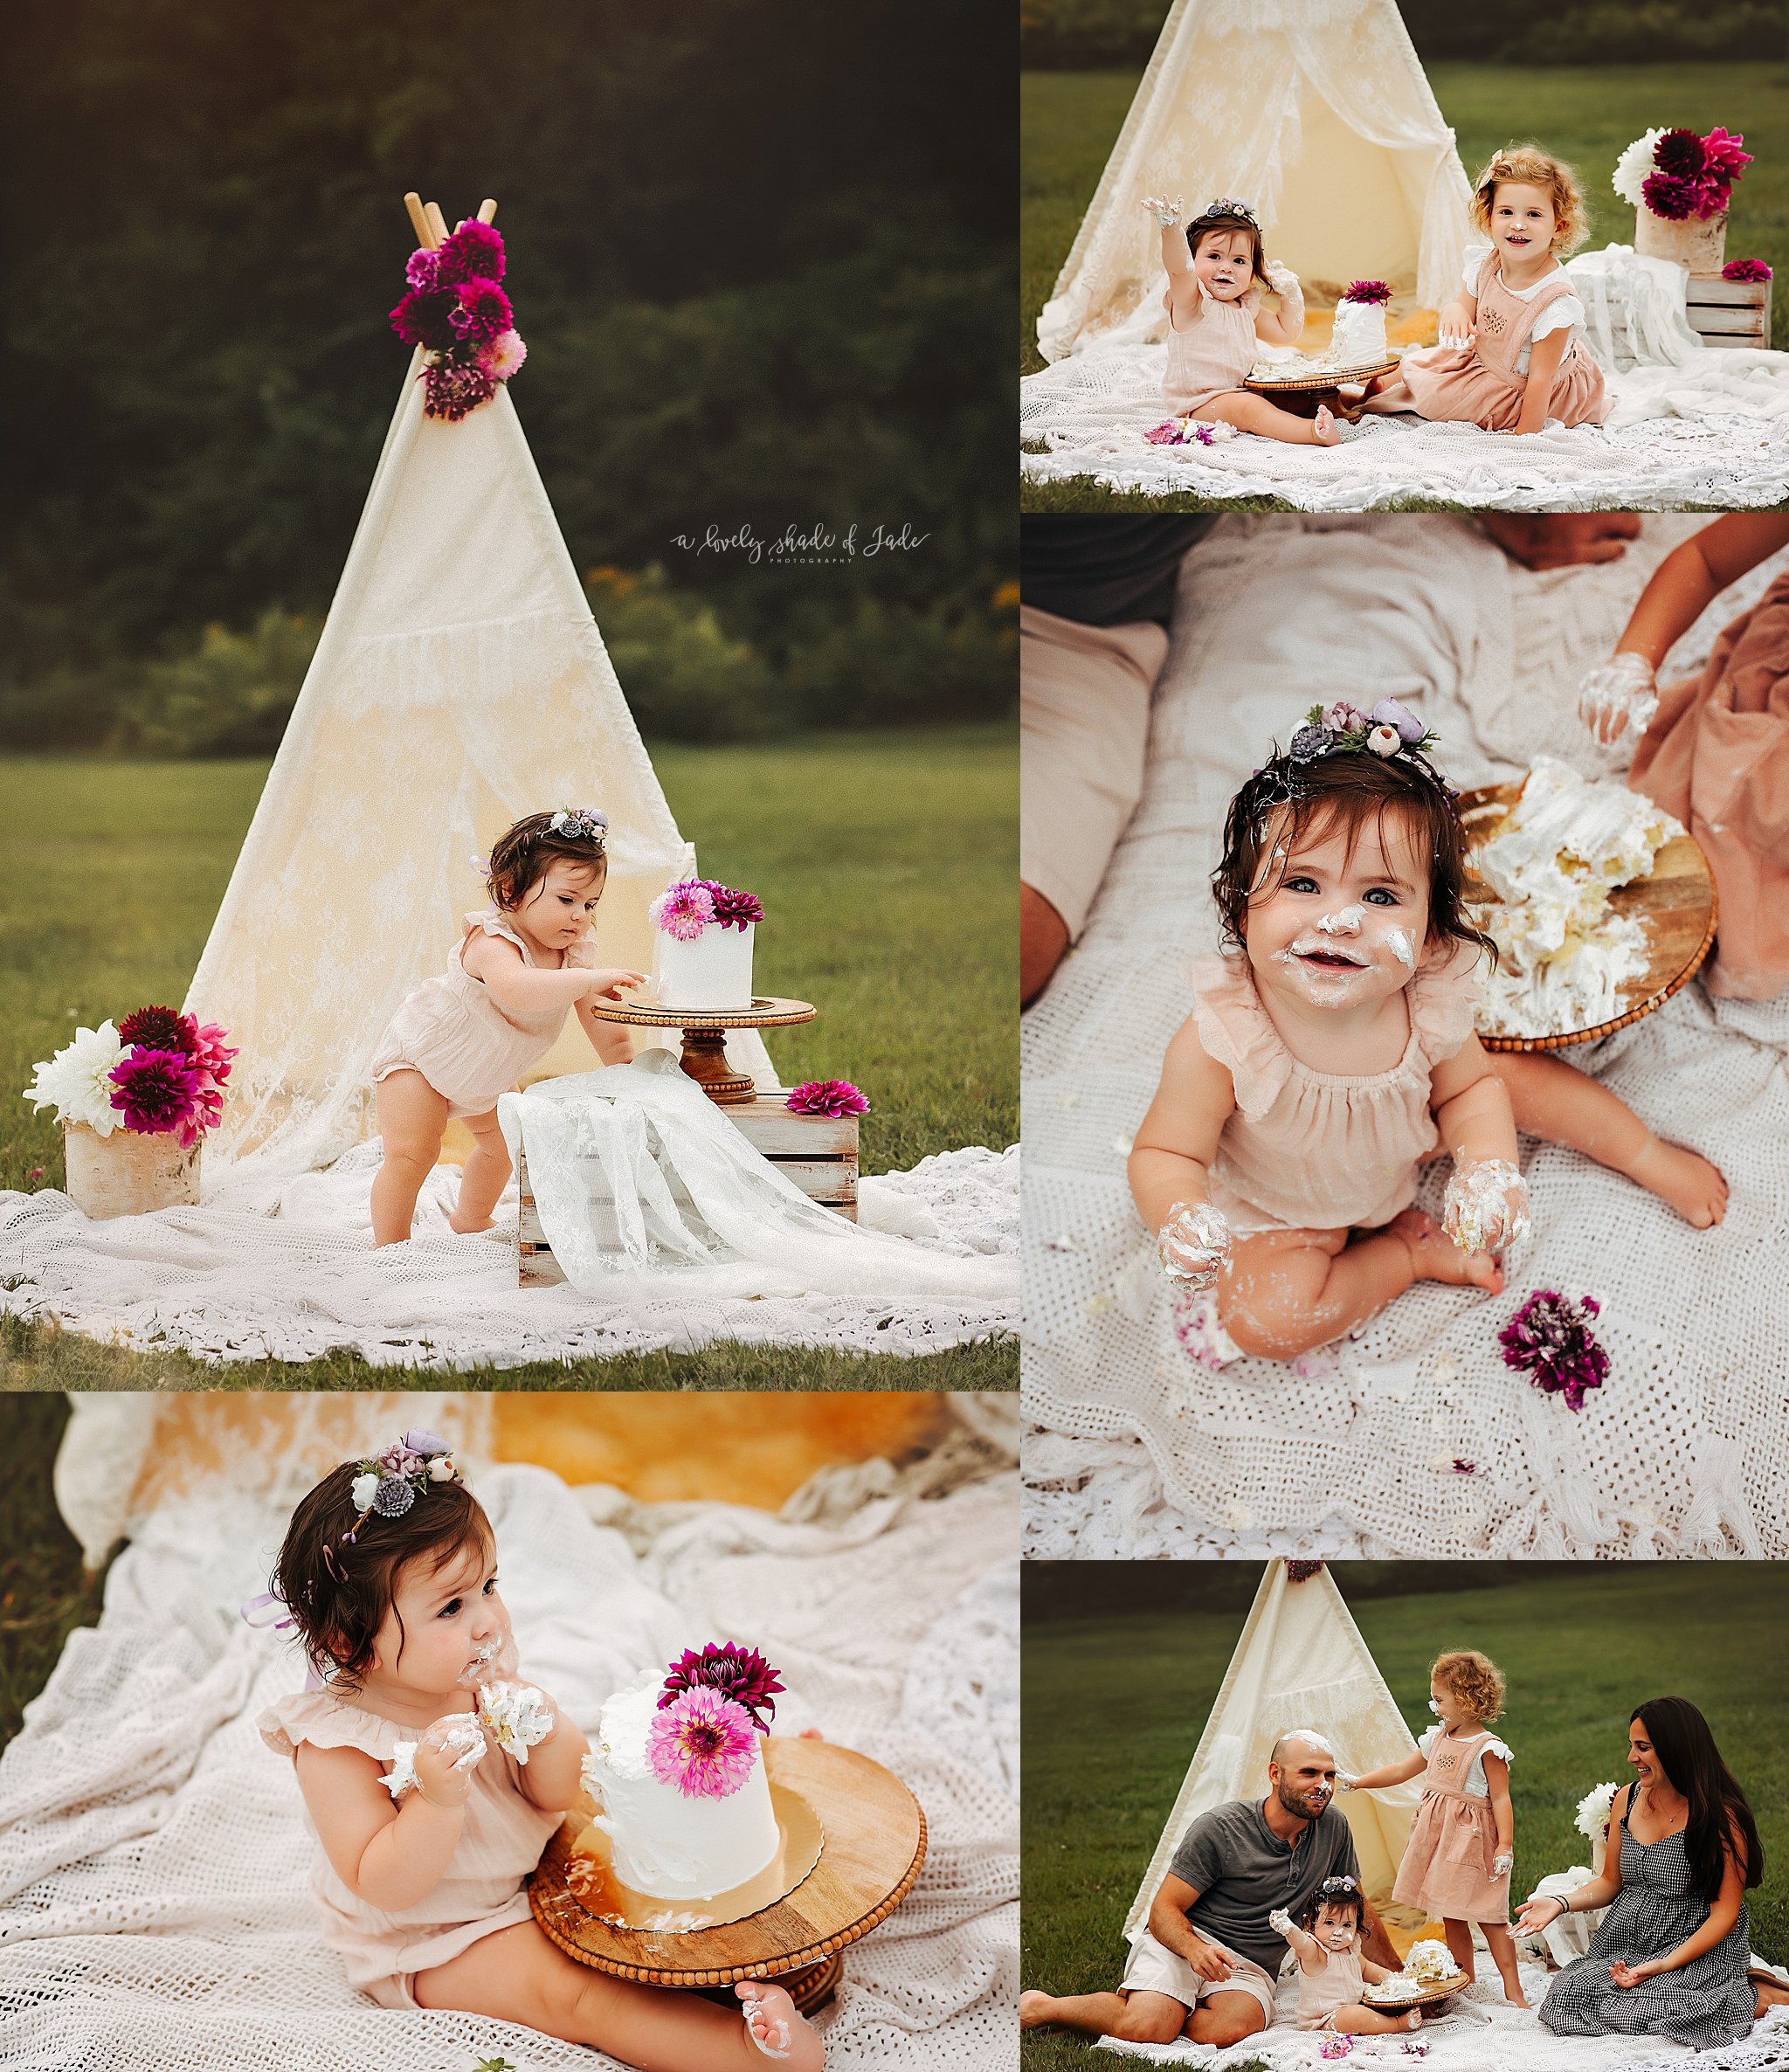 Mom styled this session so beautifully! And if the whole family isn't getting messy was it really that much fun?? lol